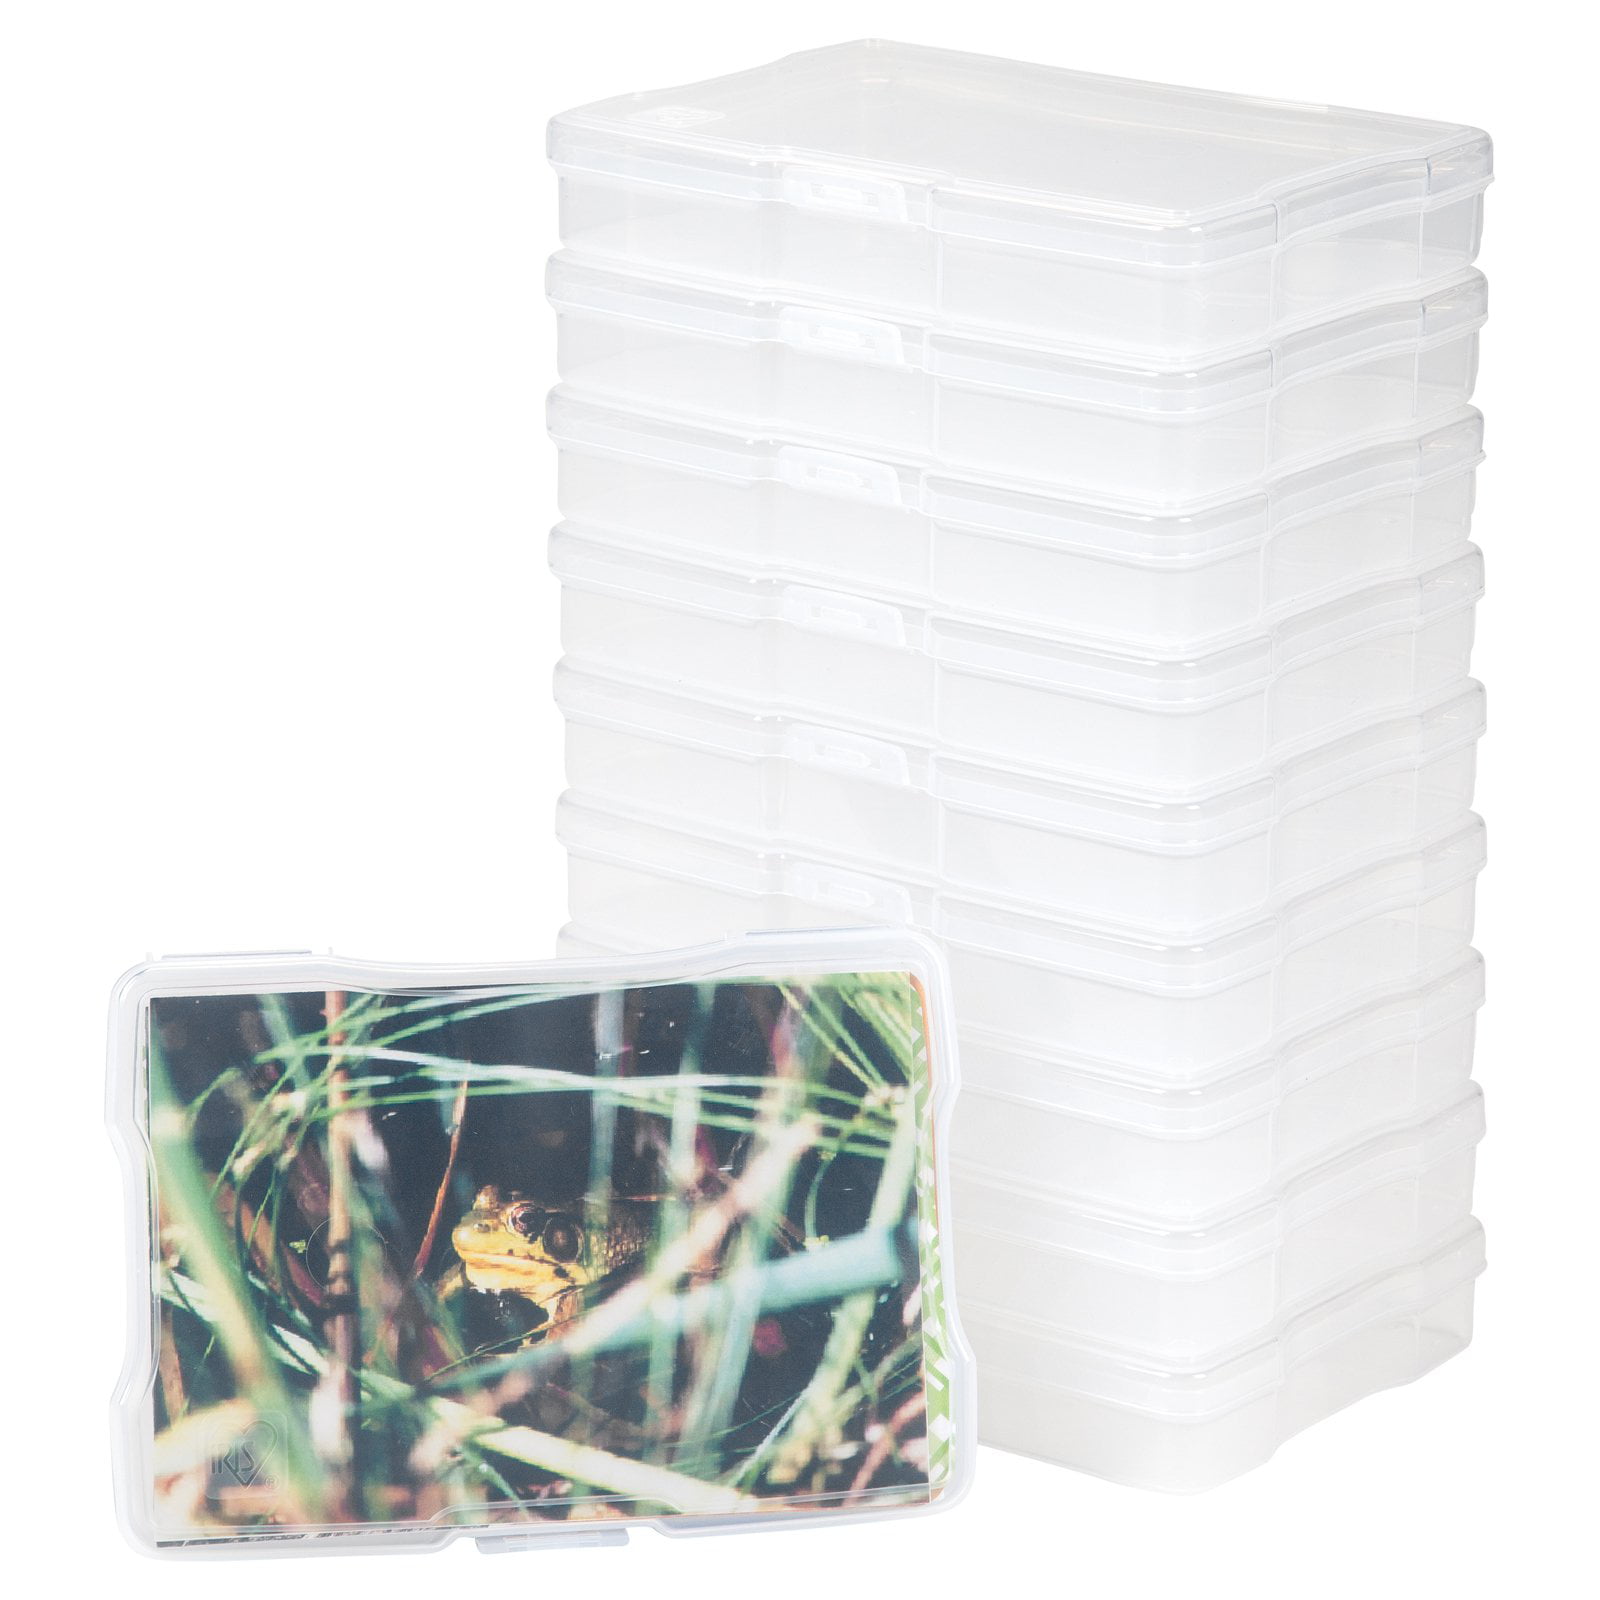 IRIS Photo and Craft Storage Cases 4" x 6" Clear Plastic #S6738 1-Set of 10 